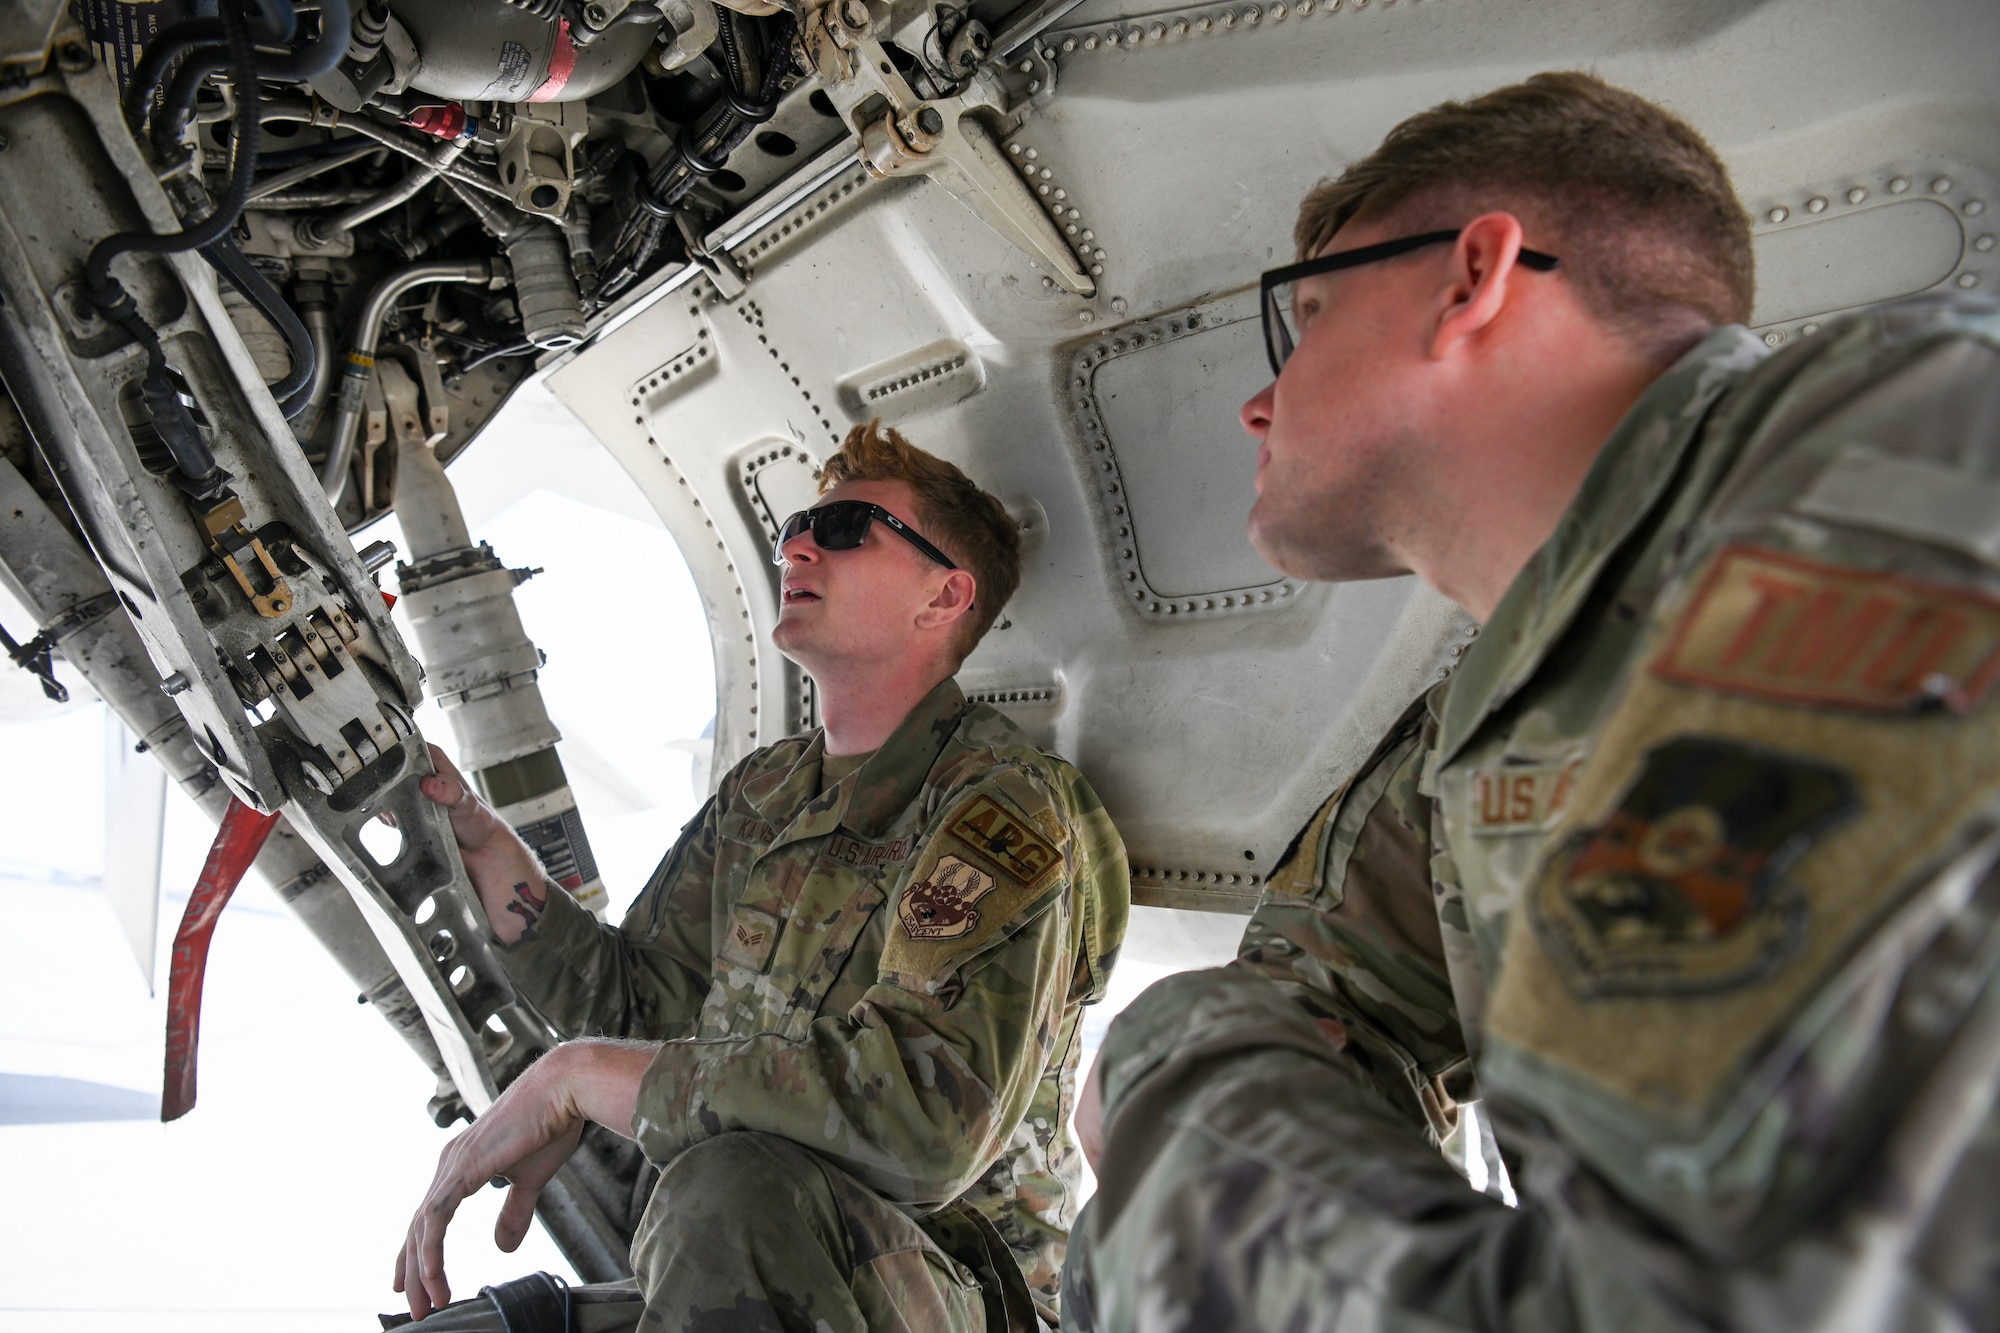 SrA Miller, right, a Traffic Management Craftsman, receives multi-capable Airman training from SrA Kaminski, left, a crew chief, during Exercise Ballast Cannon 24.3.